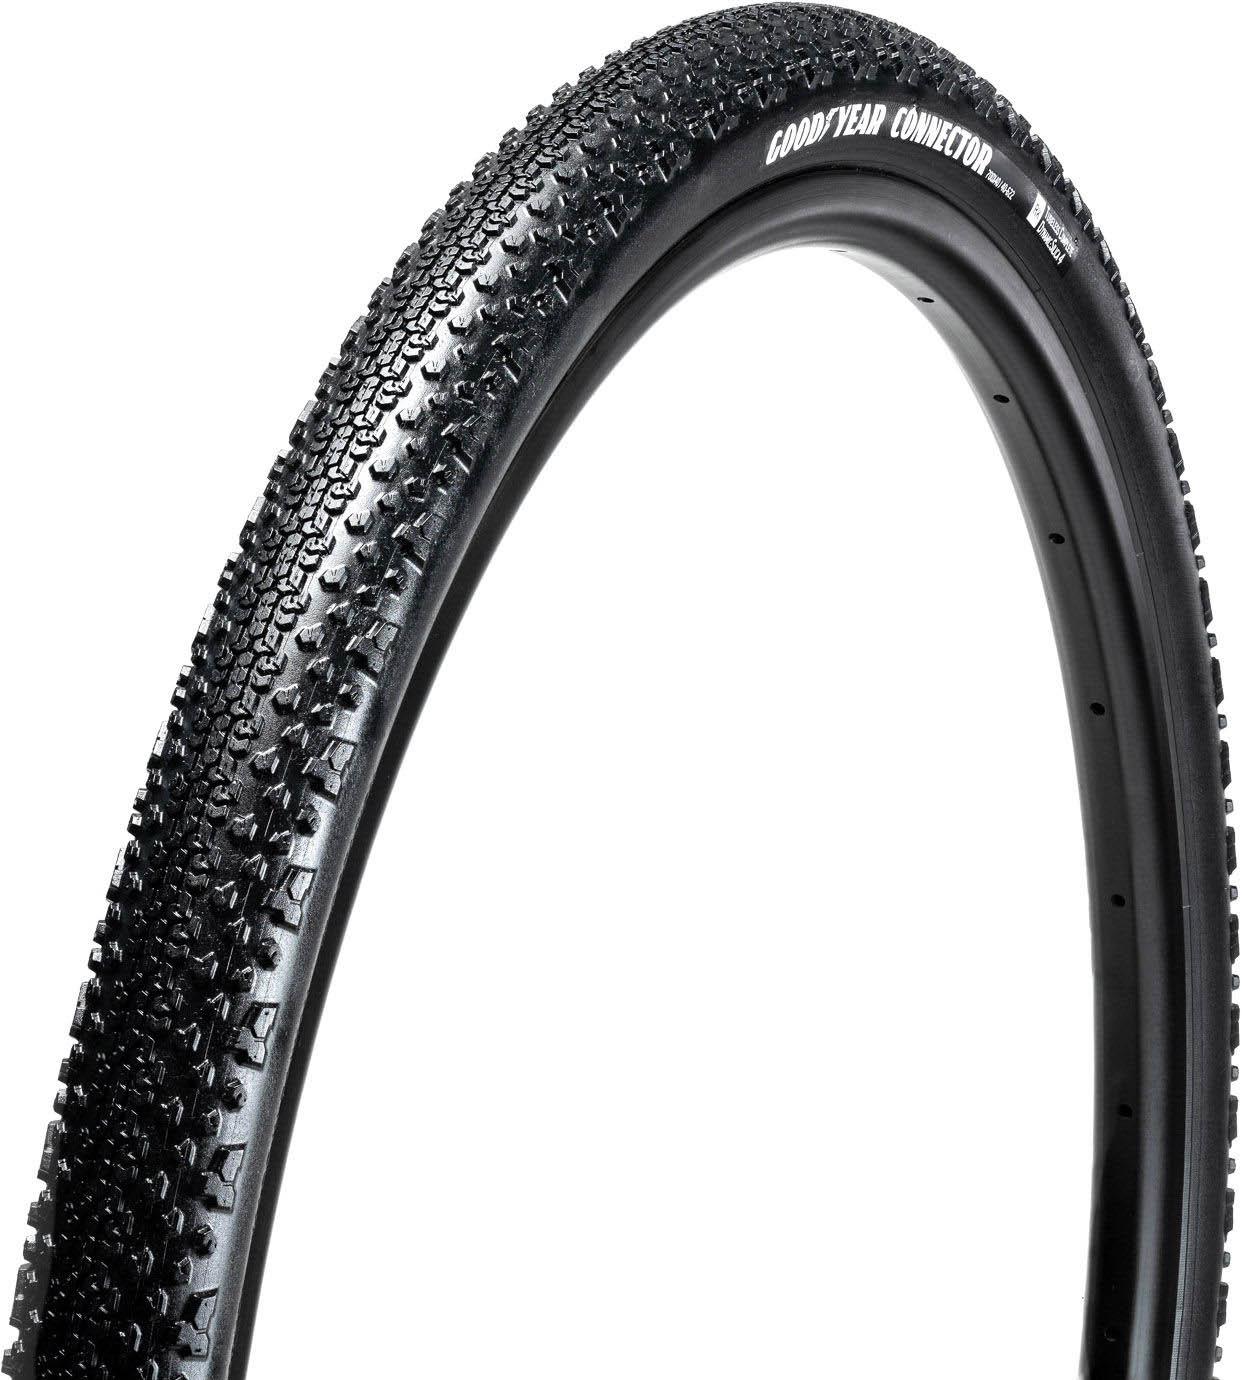 Goodyear Connector Tubeless Cyclocross Tyre - Black